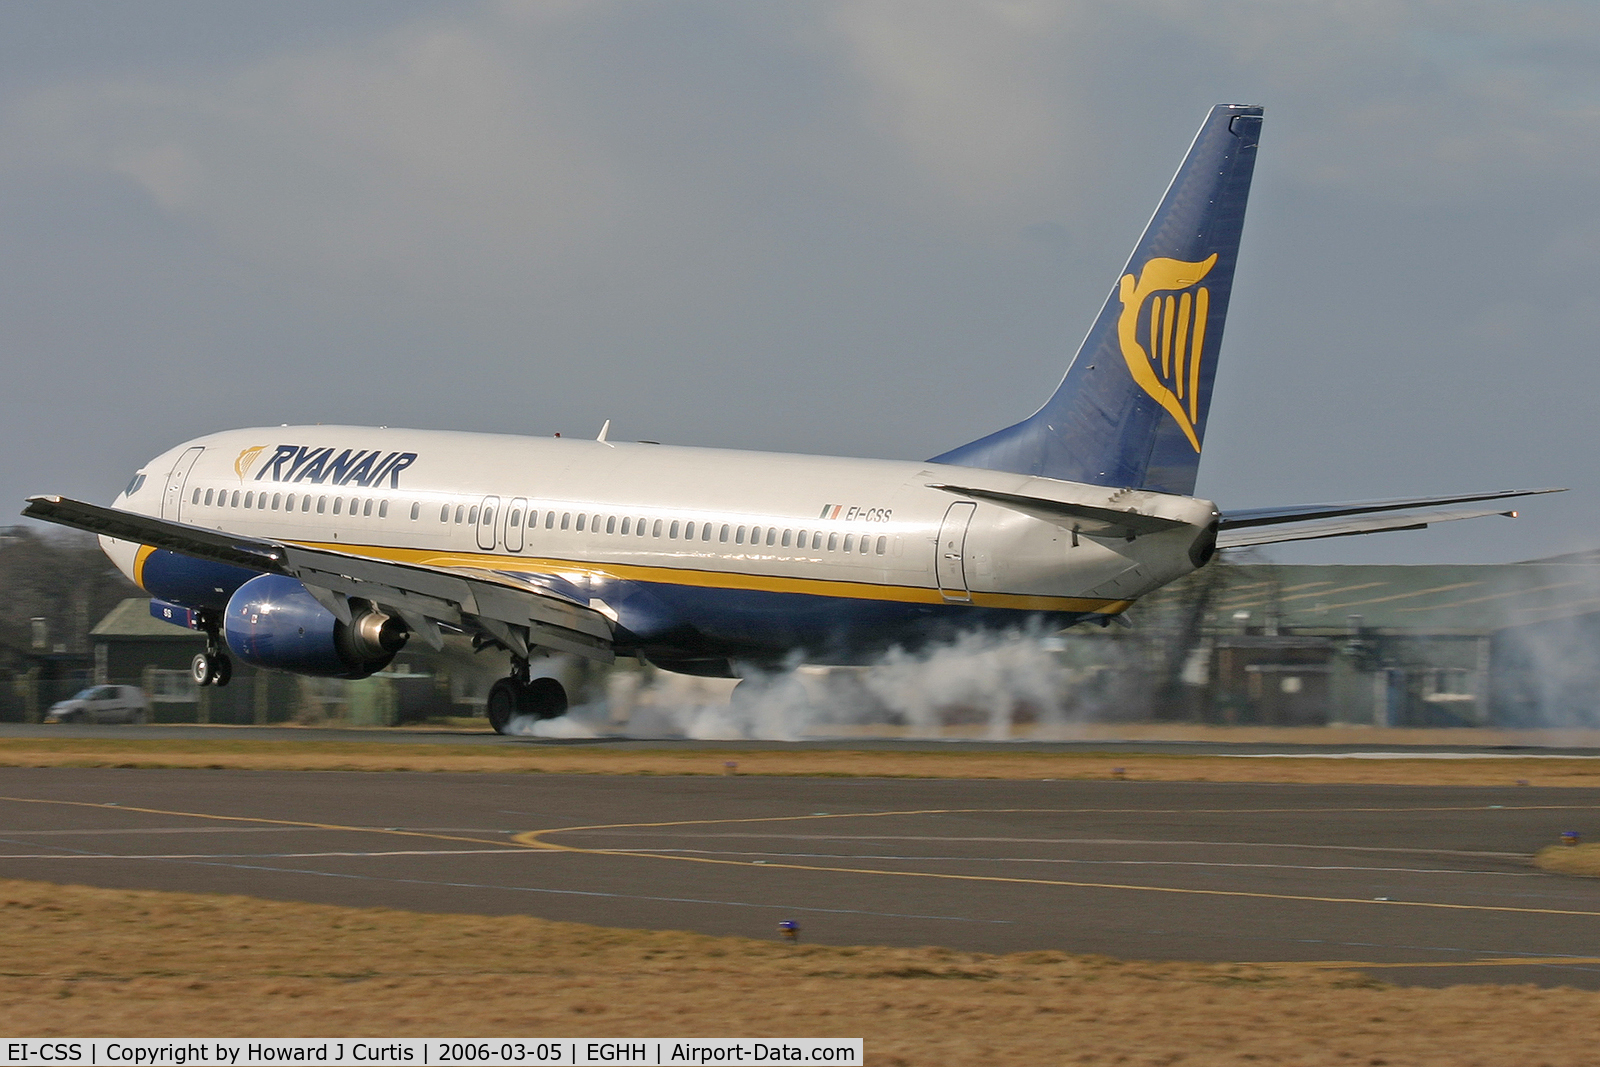 EI-CSS, 2001 Boeing 737-8AS C/N 29932, Ryanair (pre winglets), caught at the moment of touchdown.